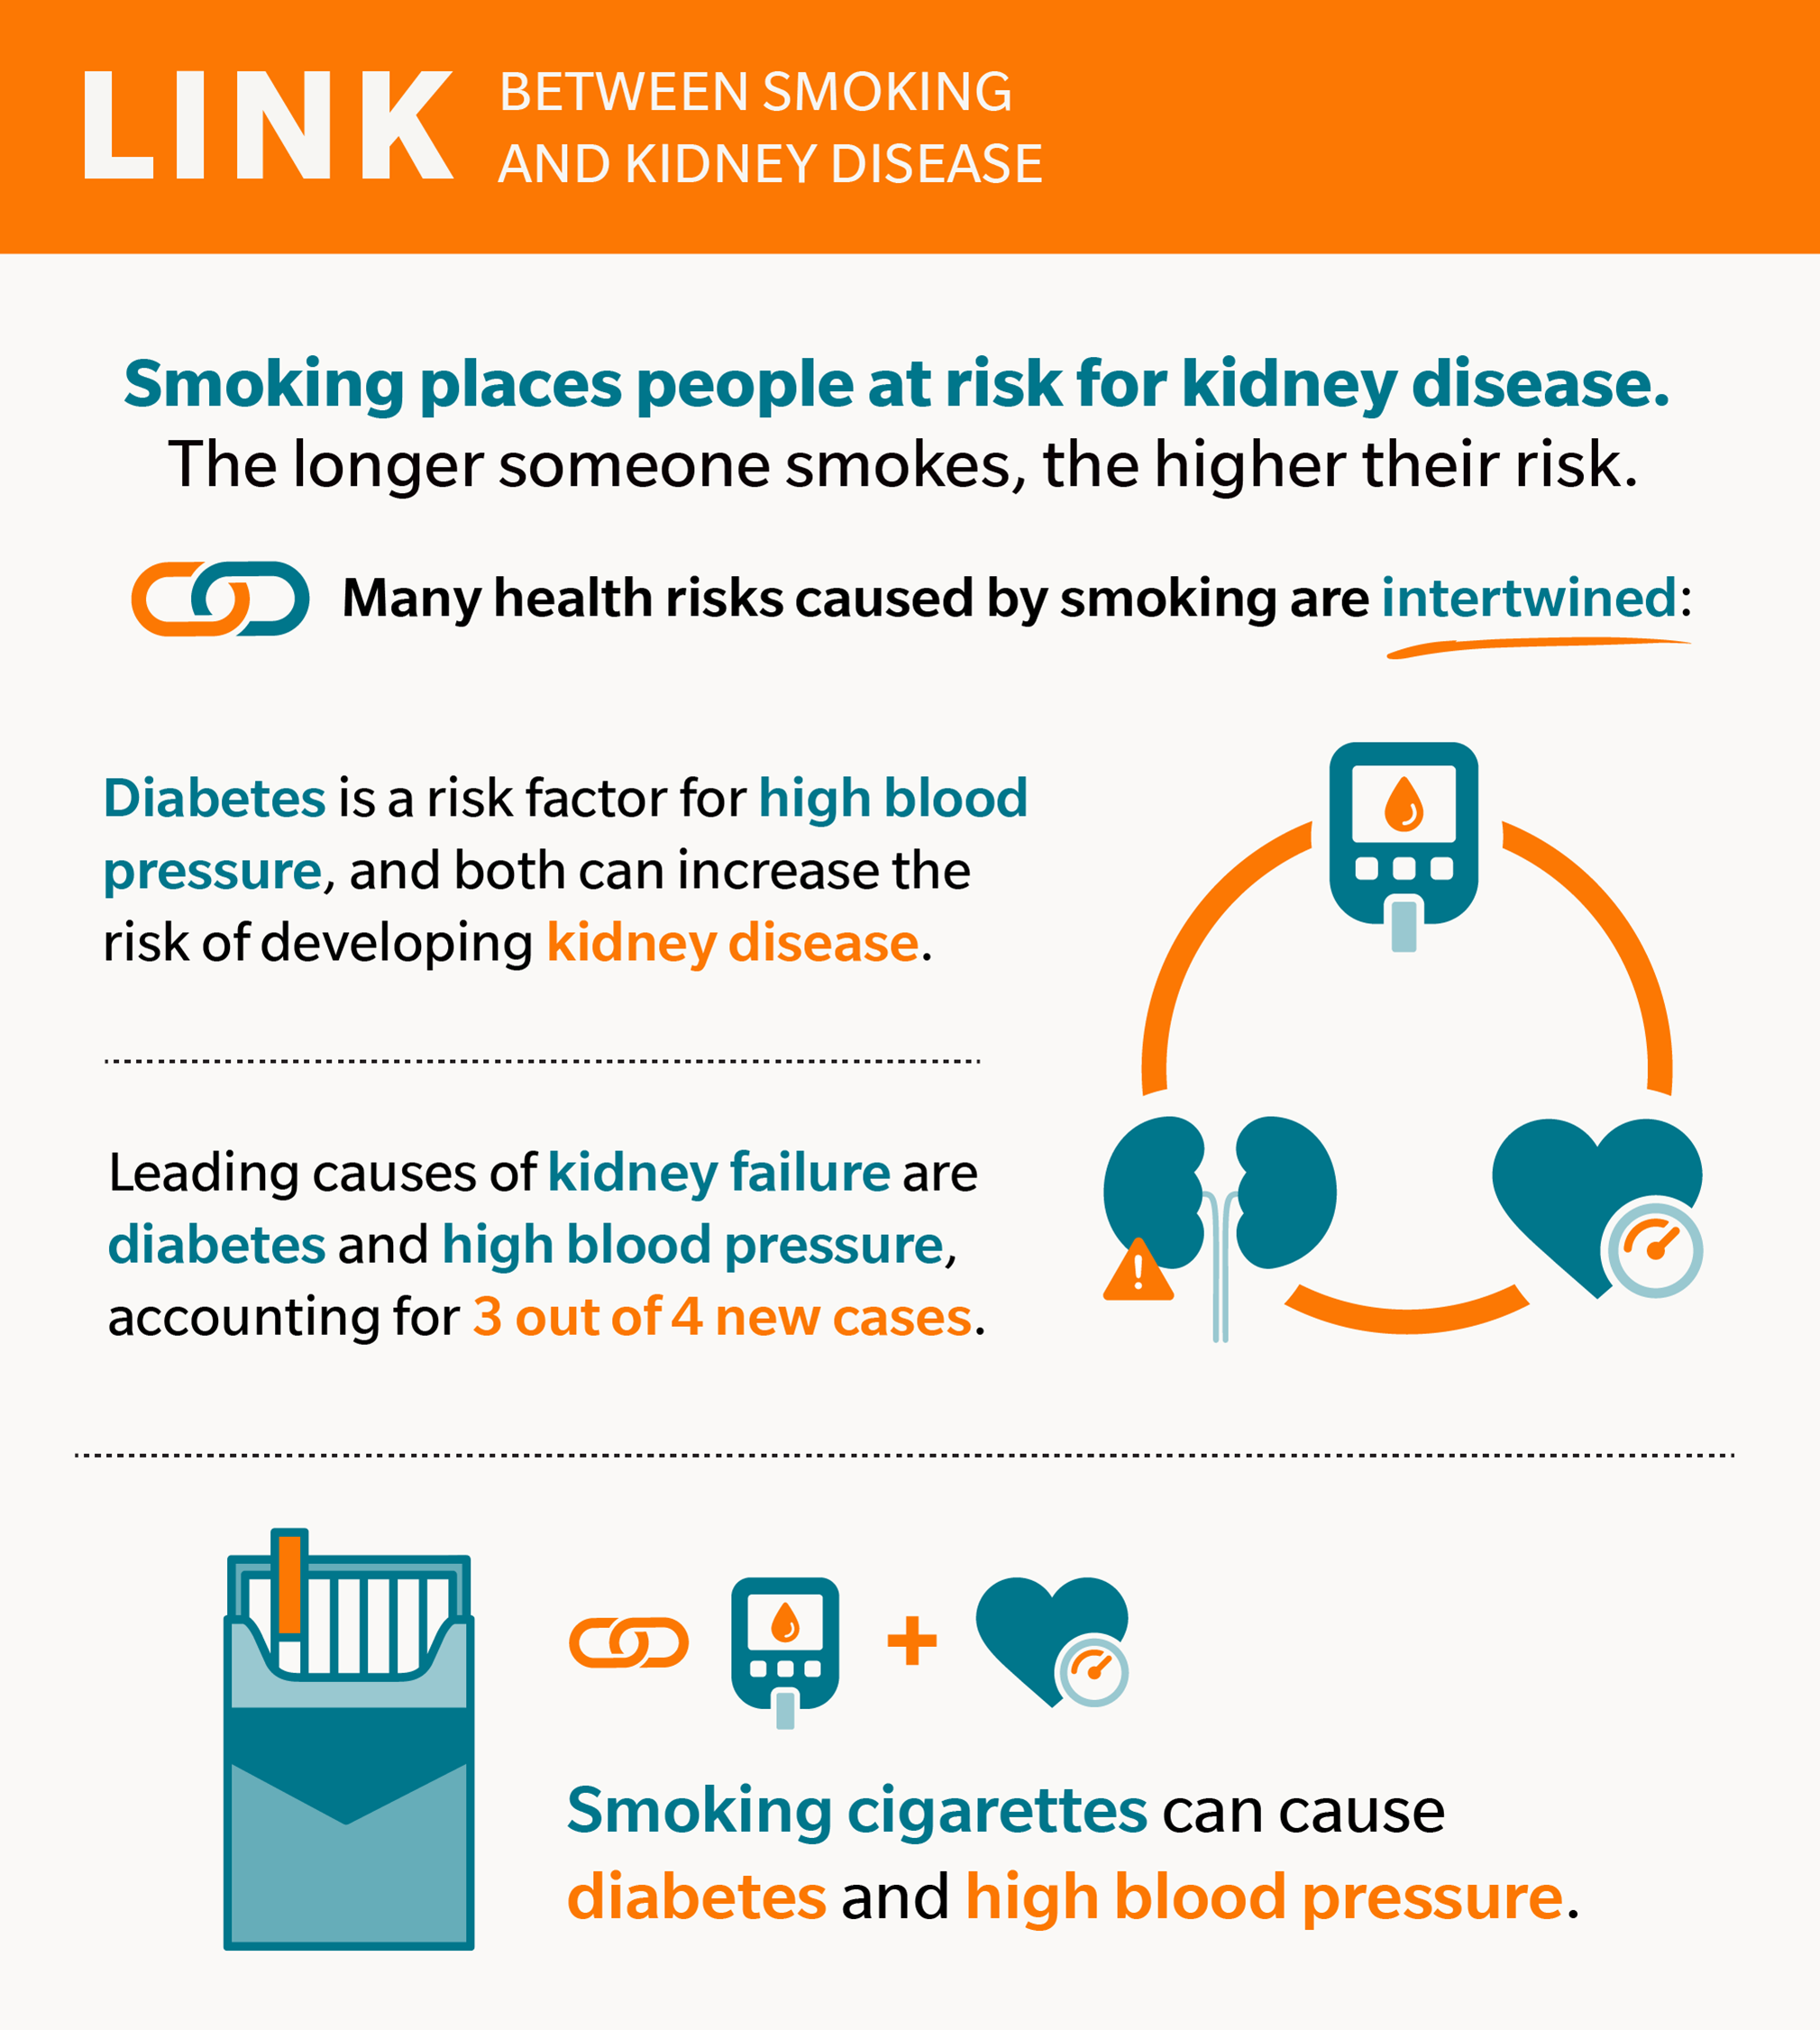 Smoking can lead to a decrease in renal function, placing people at risk for kidney disease.  And the longer someone smokes, the higher their risk for developing kidney disease. Many of the health risks caused by smoking are intertwined. For example, diabetes is a risk factor for high blood pressure, and both can increase the risk of developing kidney disease. In fact, the leading causes of kidney failure are diabetes and high blood pressure, accounting for 3 out of 4 new cases. Smoking cigarettes can cause diabetes and high blood pressure.